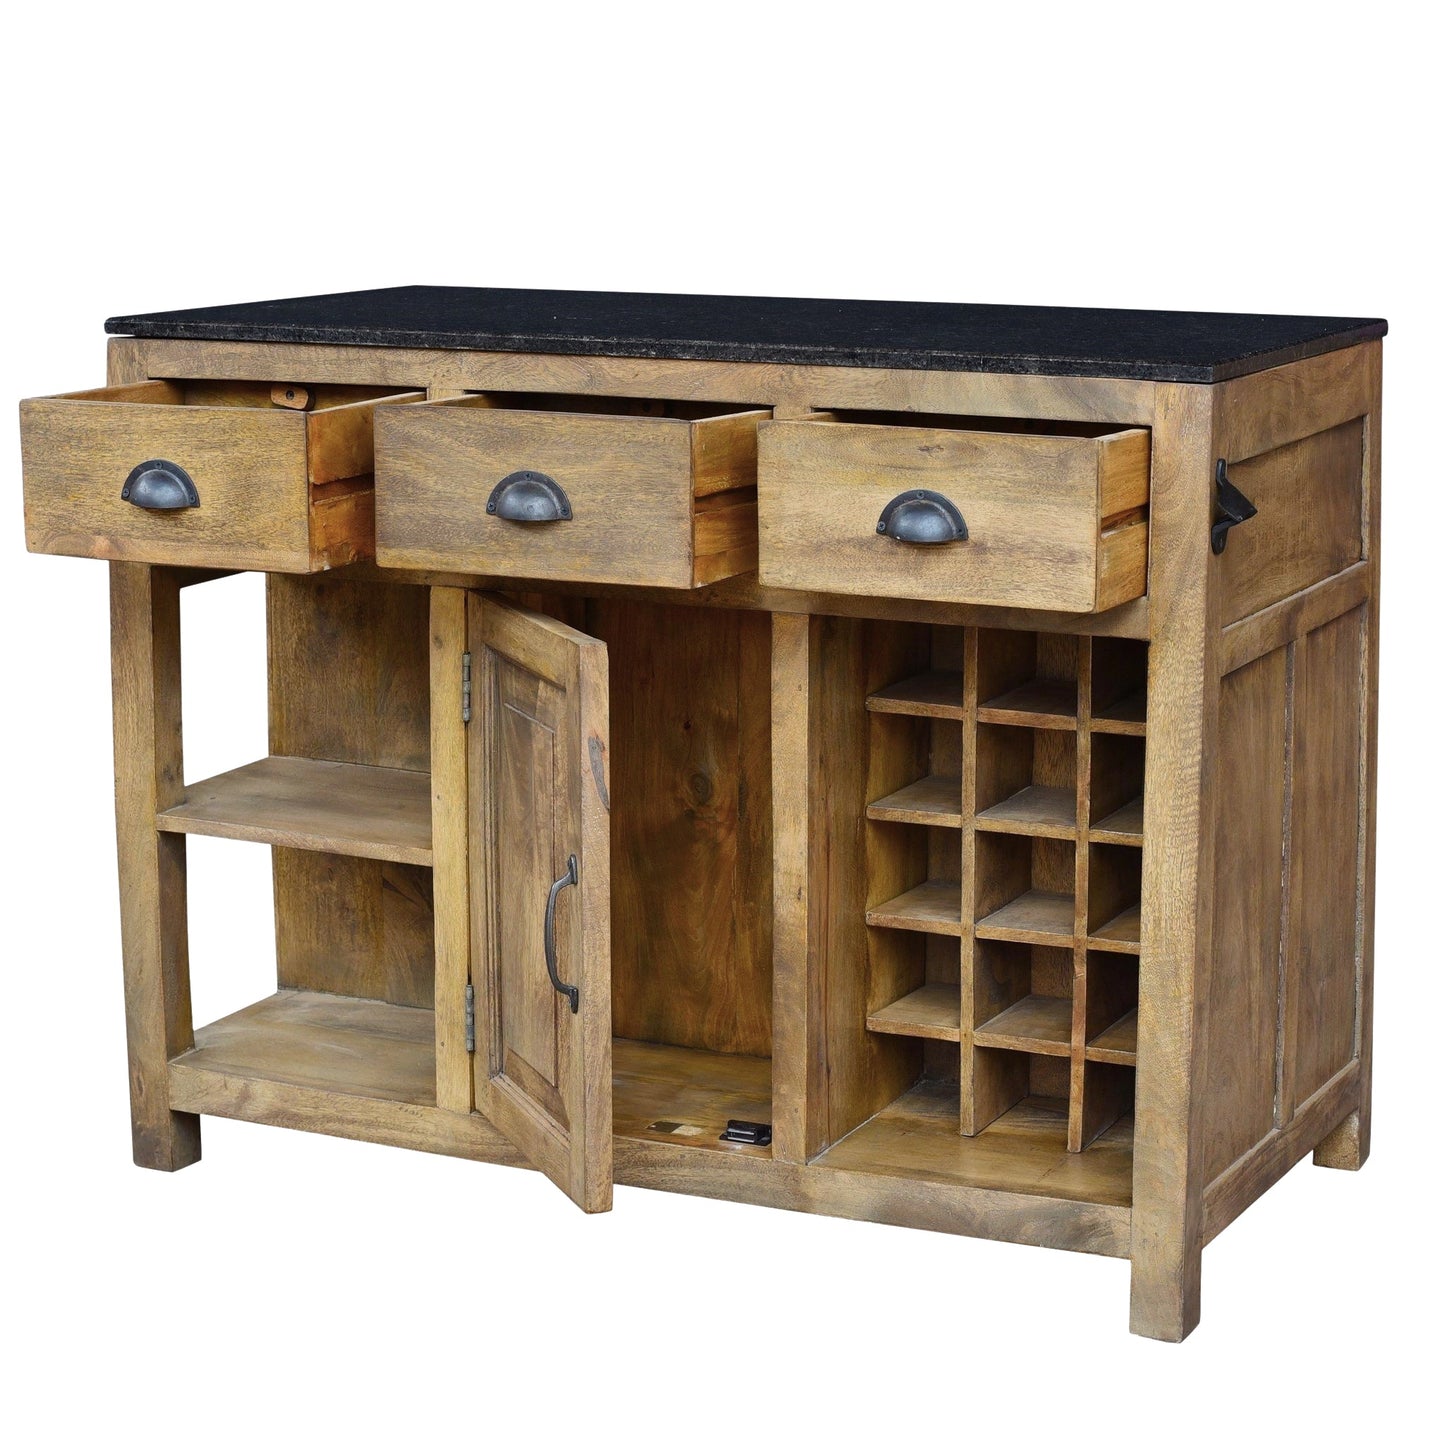 Crestview Collection Bengal Manor 47" x 24" x 37" Rustic Brown Mango Wood and Granite Kitchen Island